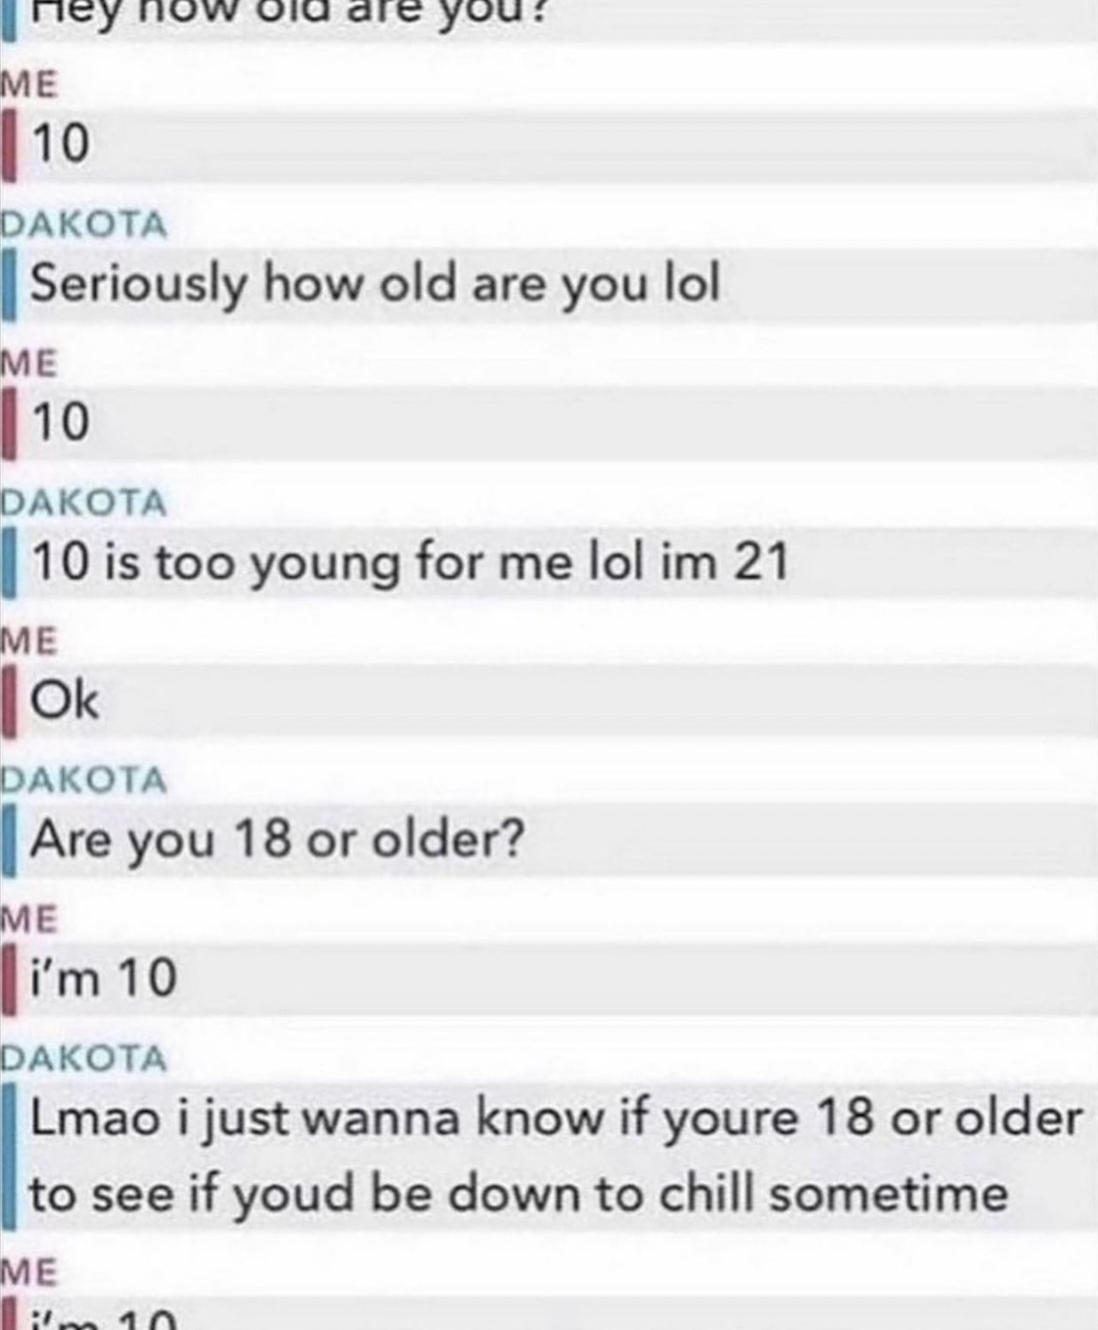 old are you im 10 meme - Me 10 Dakota Seriously how old are you lol Me 10 Dakota 10 is too young for me lol im 21 Me Ok you? Dakota 1 Are you 18 or older? Me i'm 10 Dakota Lmao i just wanna know if youre 18 or older to see if youd be down to chill sometim